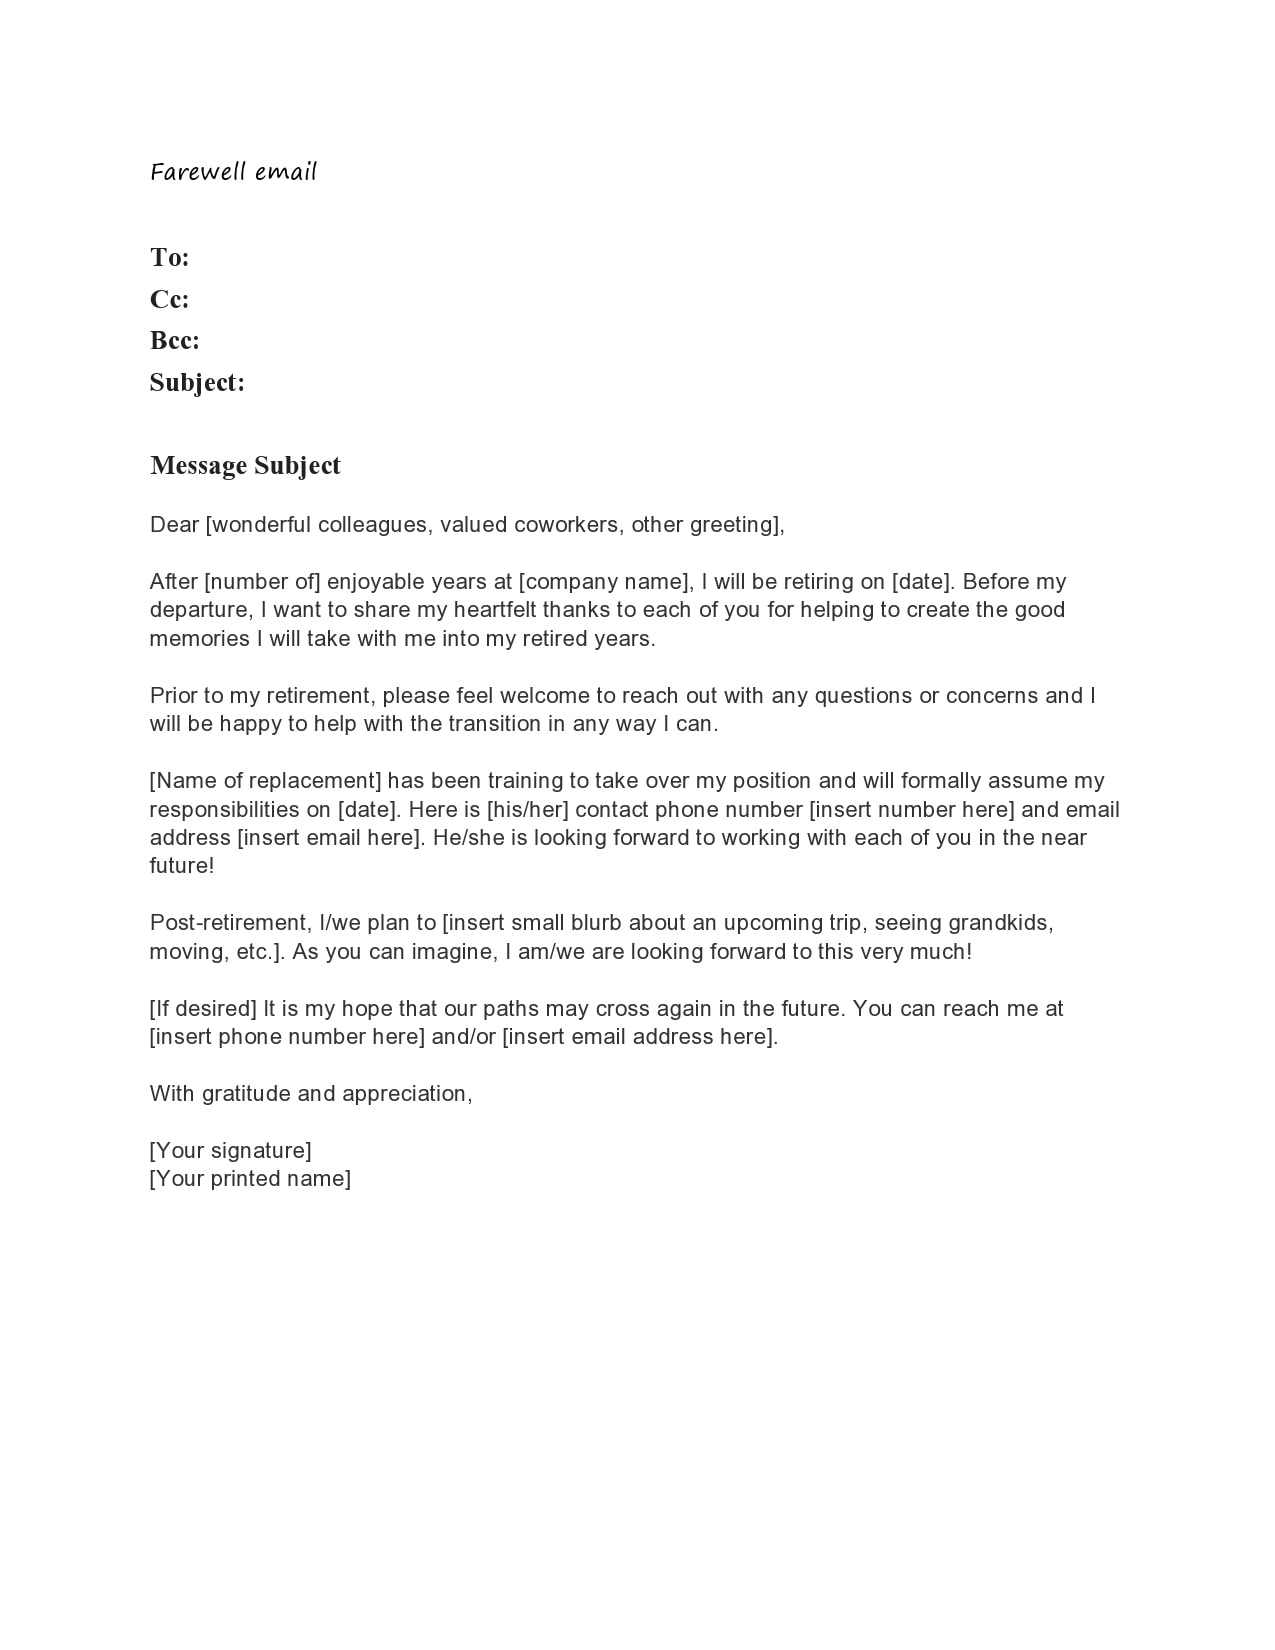 28 Perfect Farewell Letters To Boss Or Colleagues Templatearchive Retirement goodbye letter to coworkers